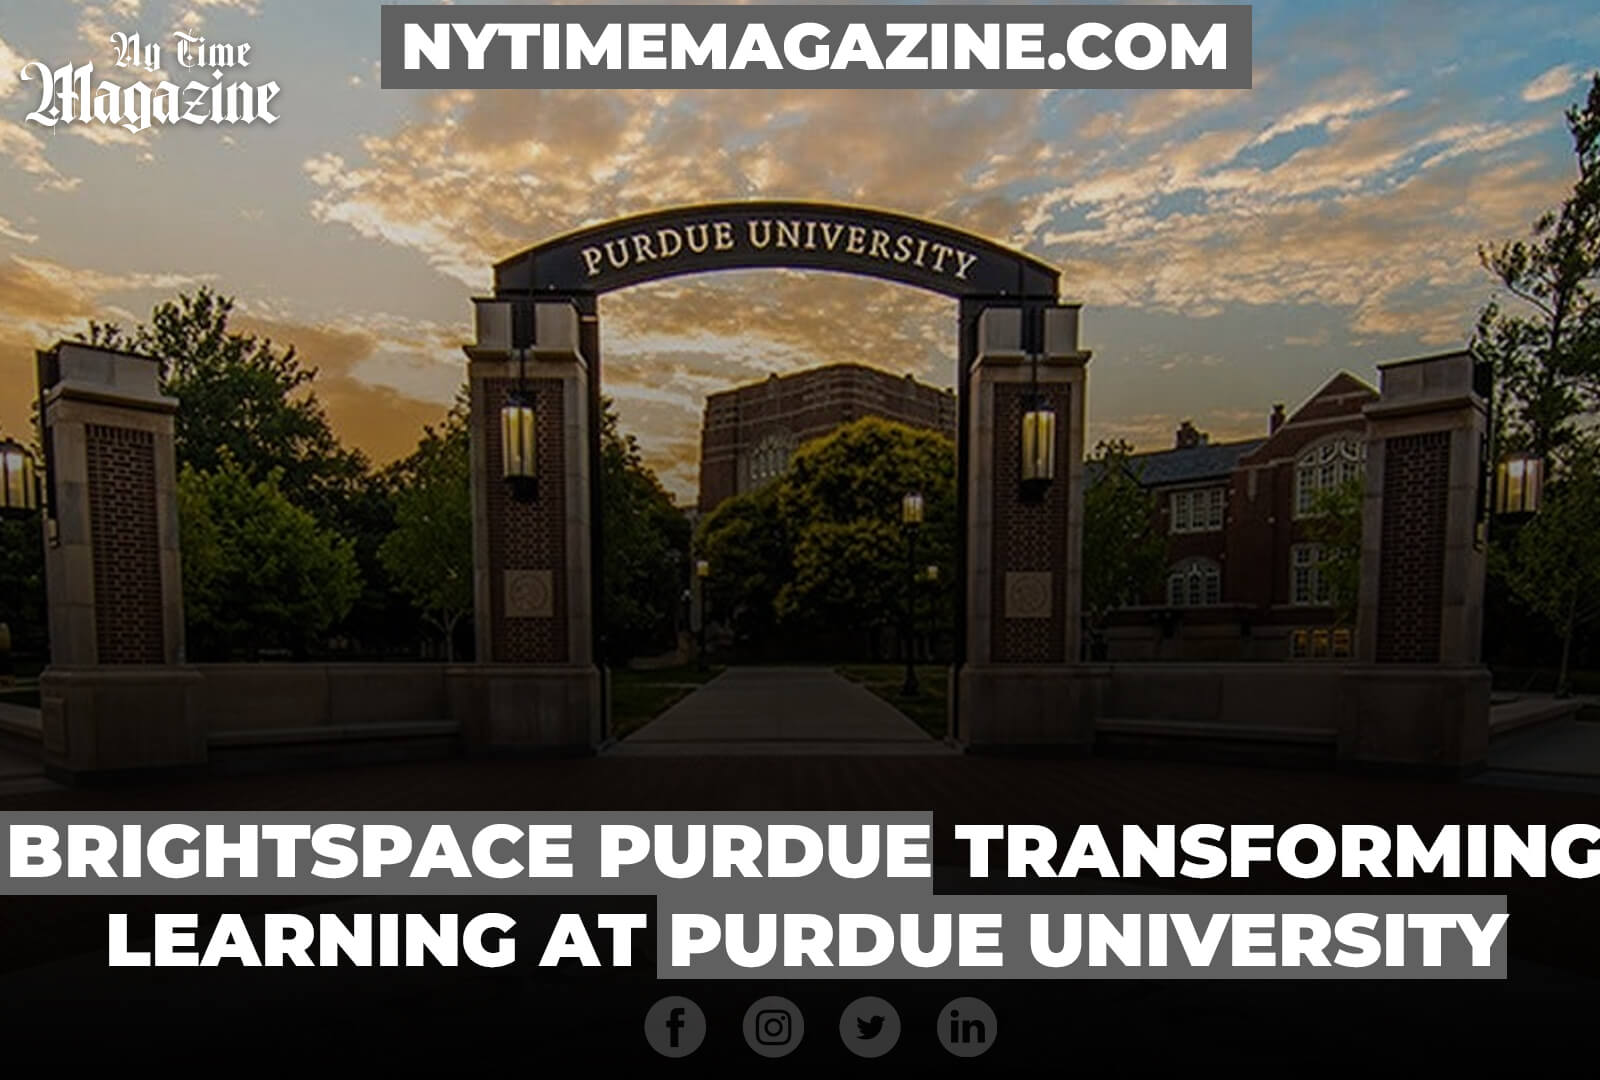 BRIGHTSPACE PURDUE: TRANSFORMING LEARNING AT PURDUE UNIVERSITY